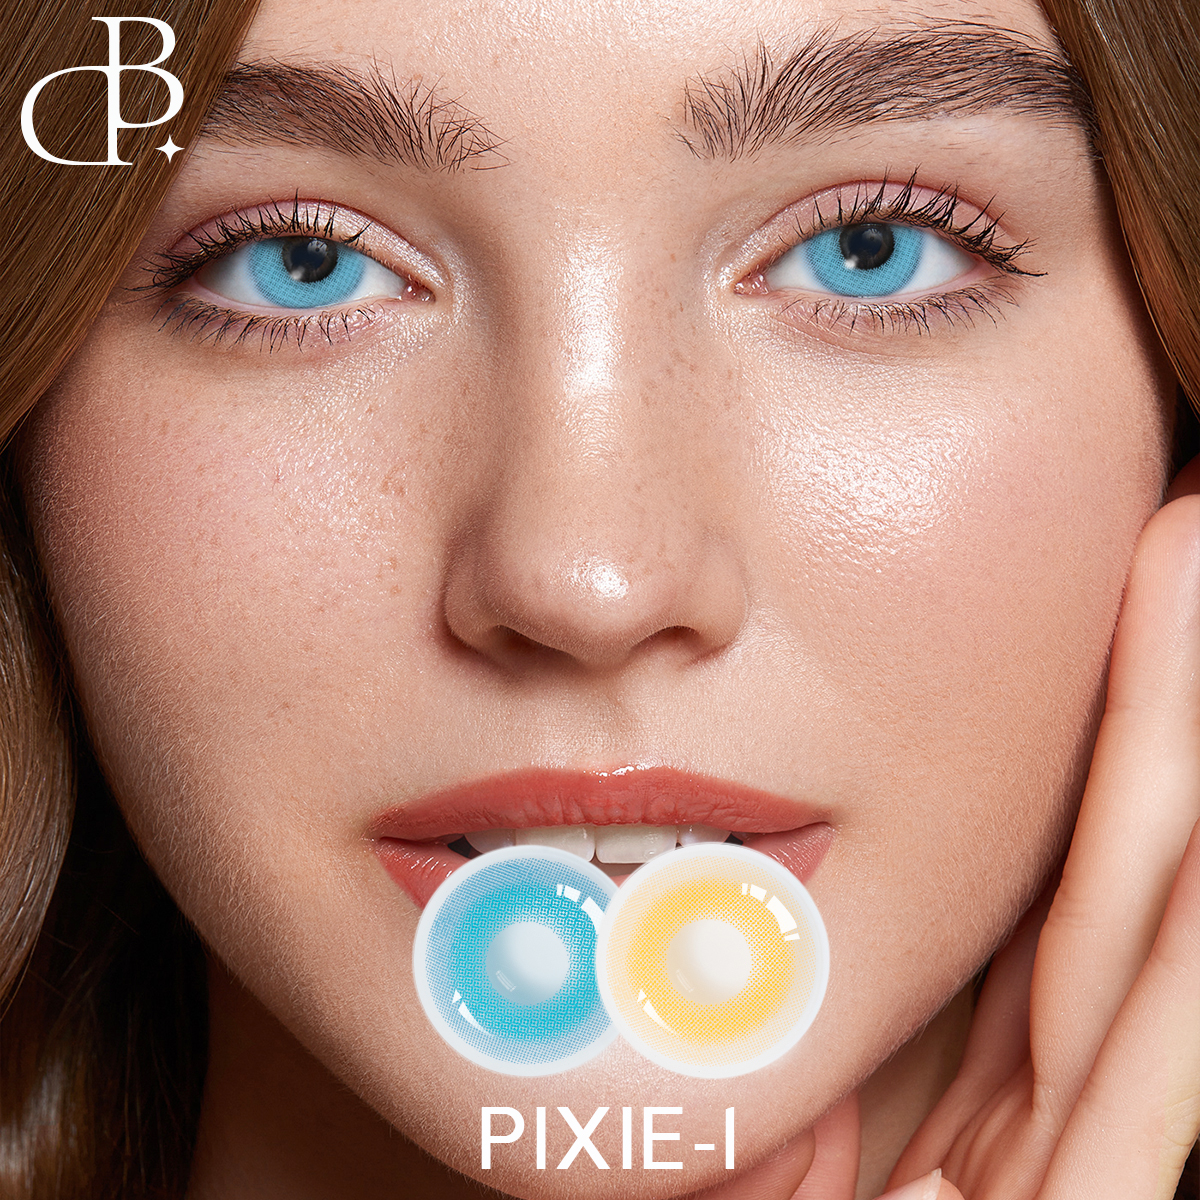 PIXIE OEM ODM Custom contact lenses Hot Eye Contact Lens dbeyes Custom Cosmetic Extra Lens Cosmetic Soft Contacts Yellow Big Eye Color Contact Lenses